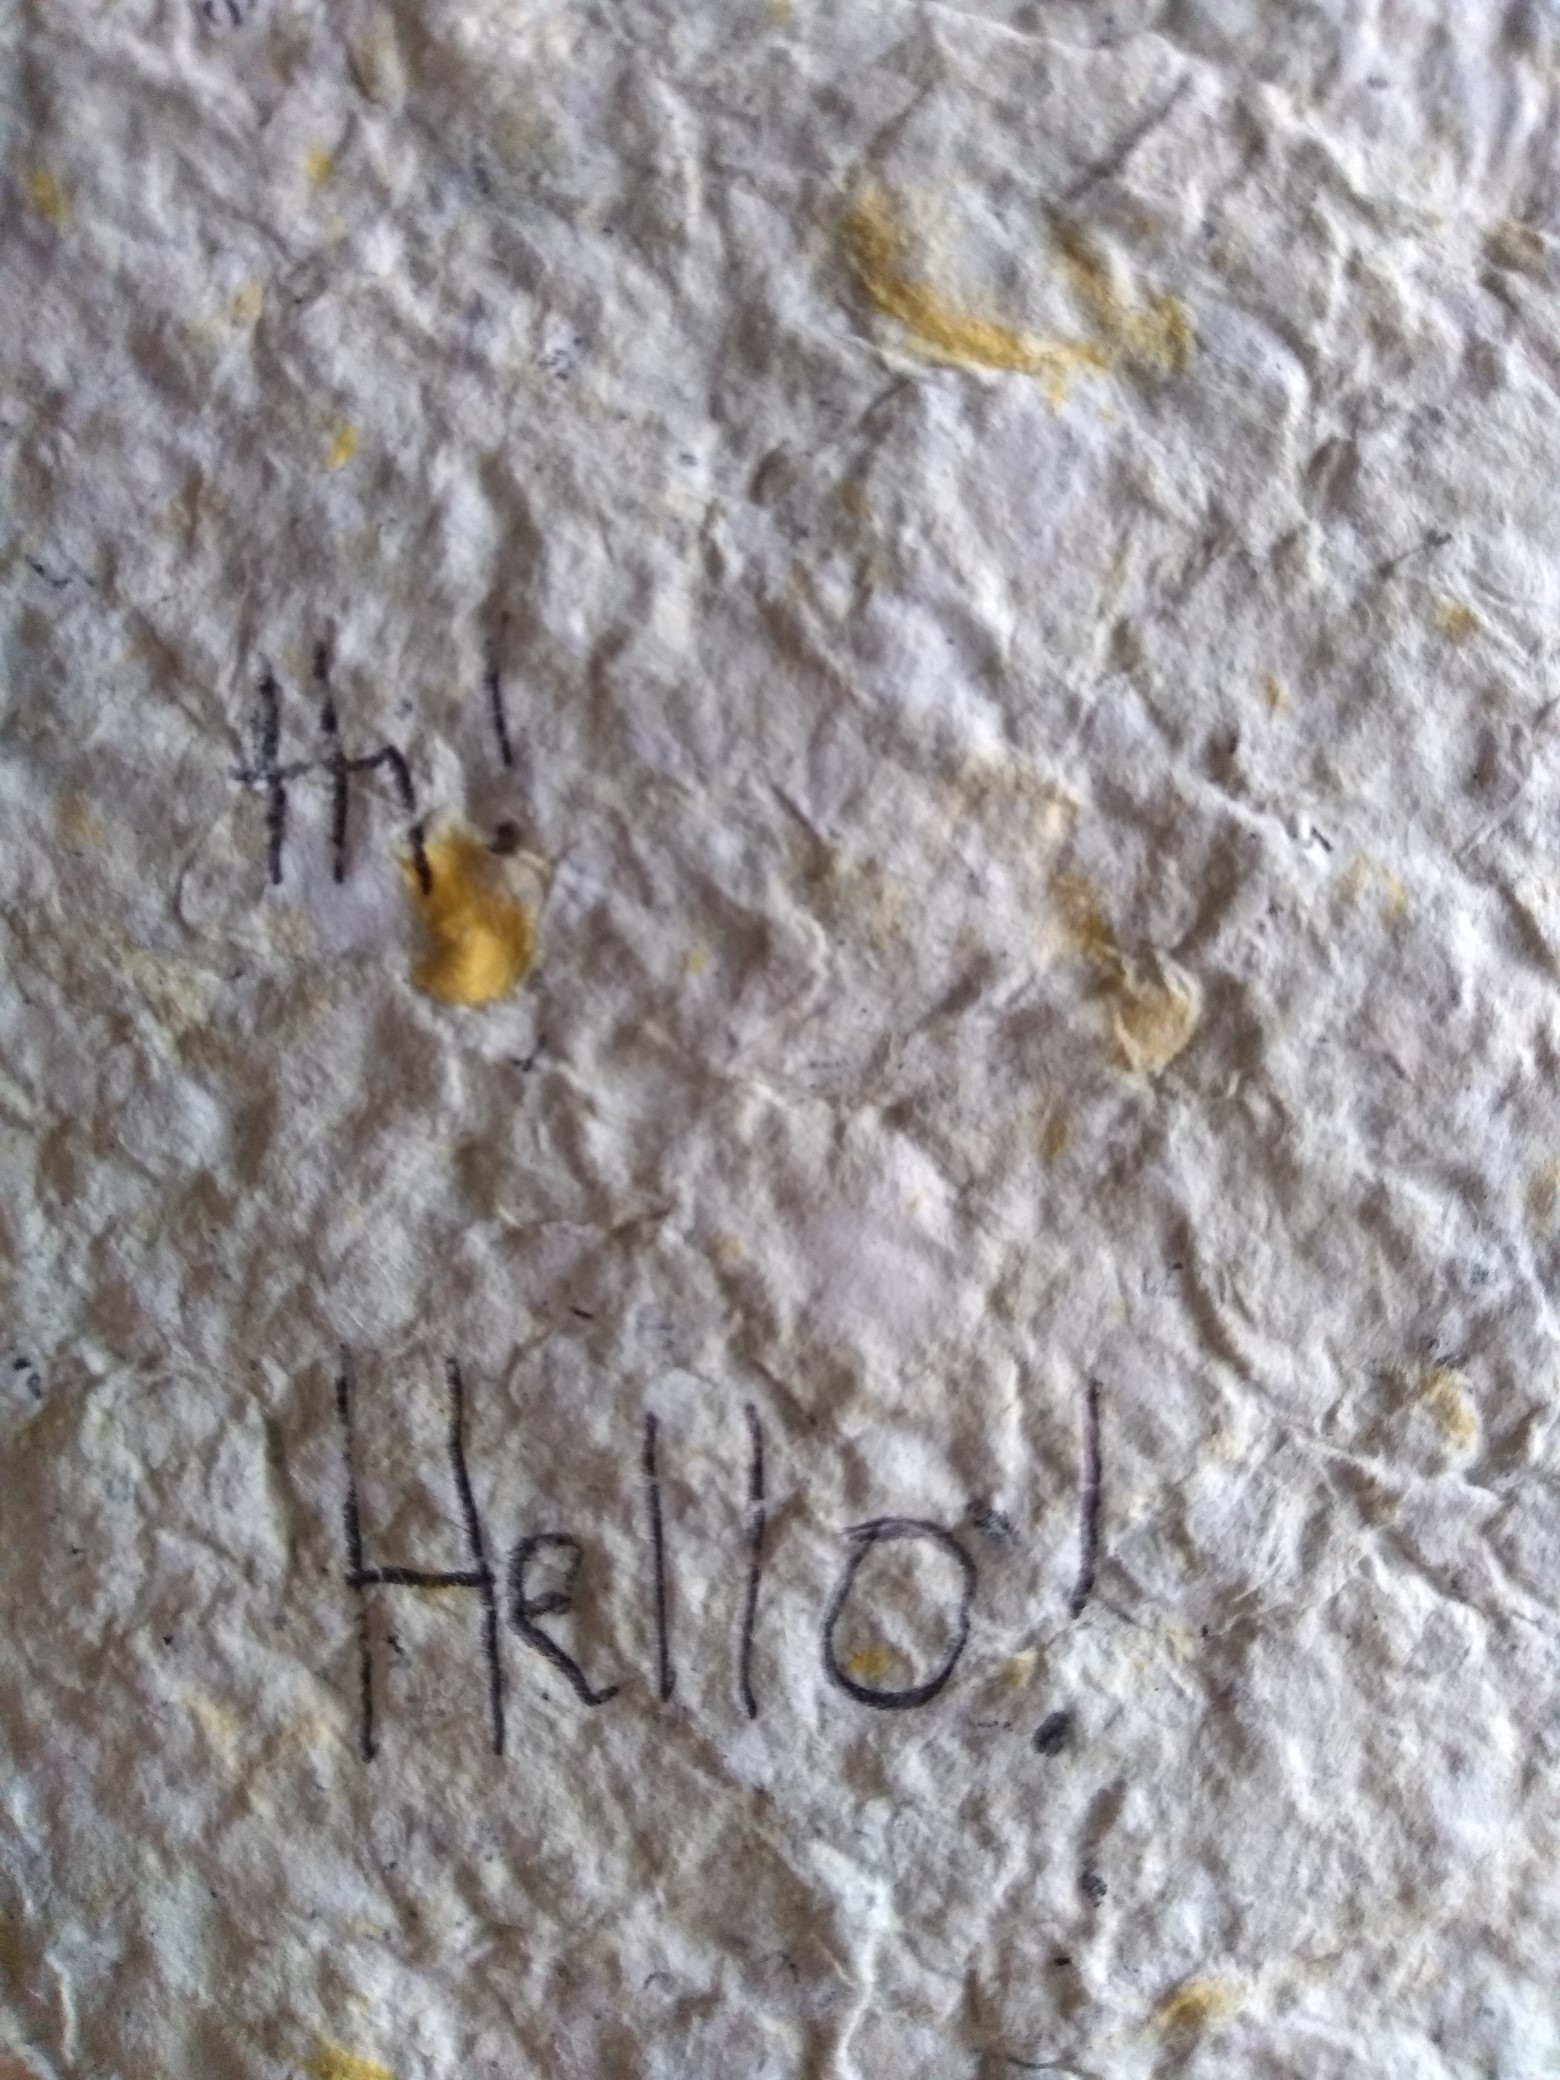 Handmade paper with the word "Hi!" written on it.